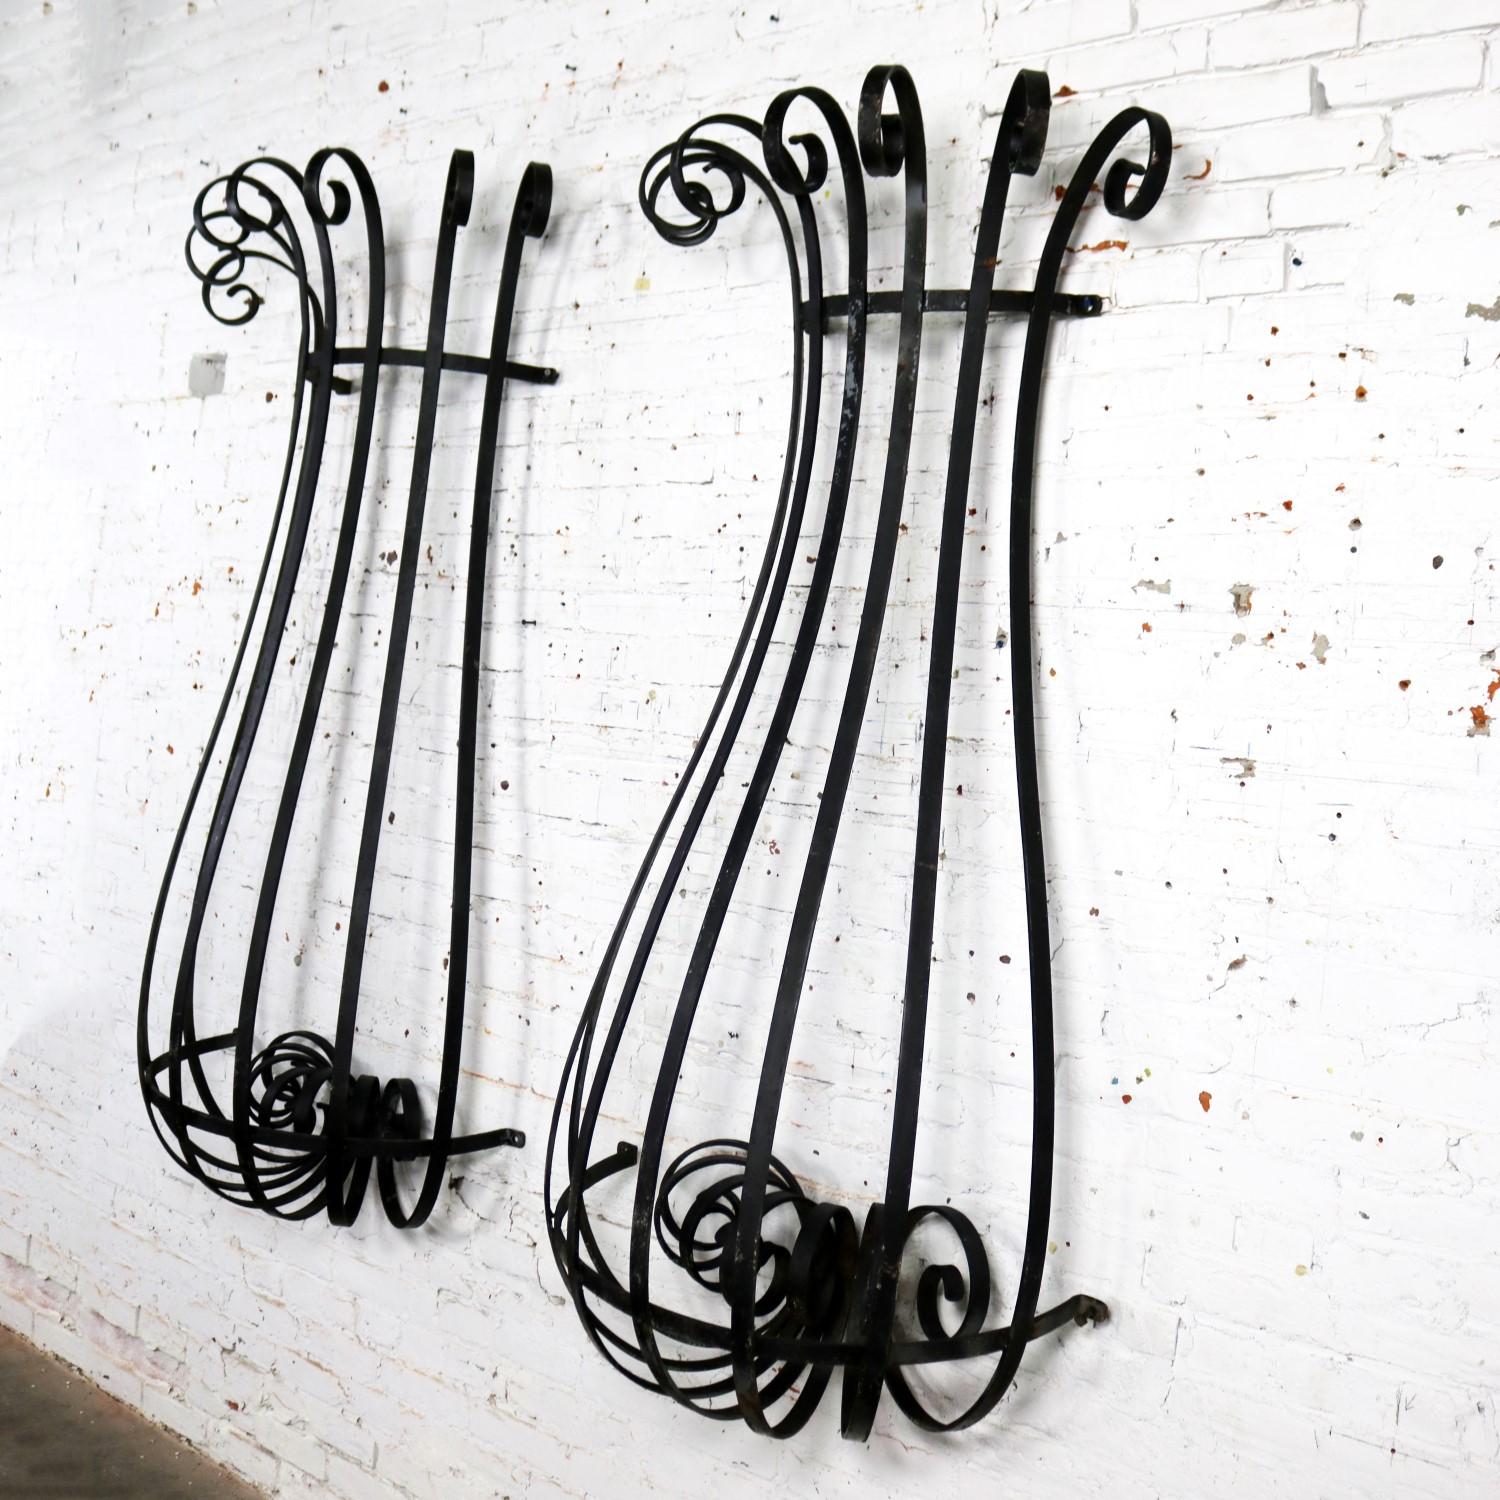 Baroque Revival Architectural Antique Window Guards or Wall Urn Planters Hand-Wrought Iron